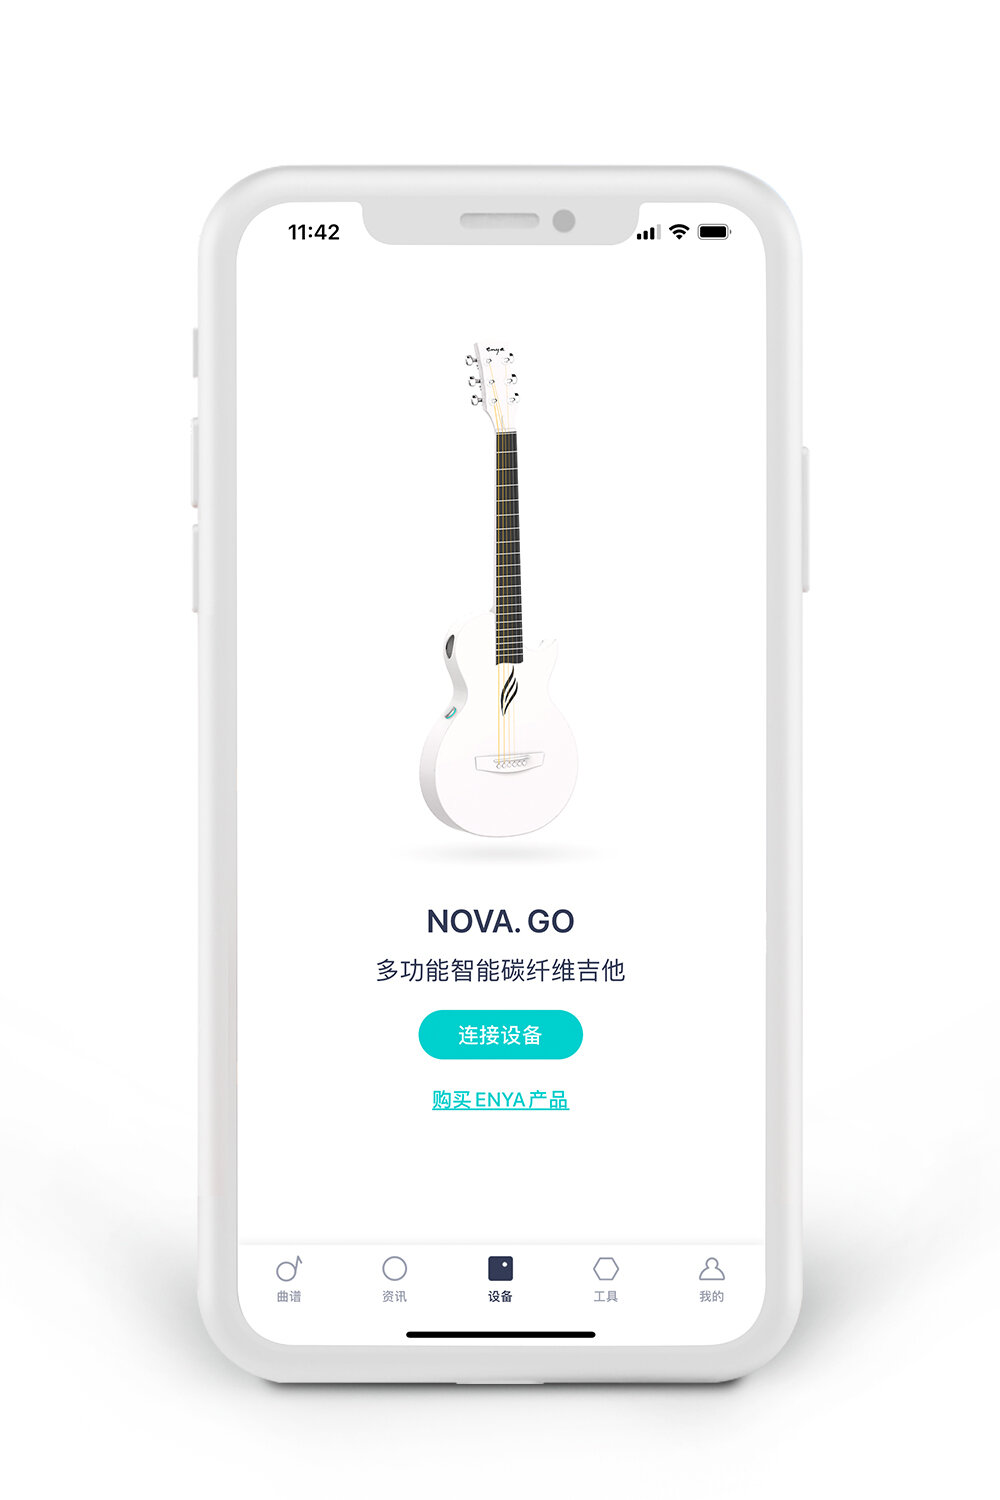 Connect your Nova Go with Bluetooth! - One of the core functions of Enya Music APP is the intelligent and innovative music software specially created for NOVA GO. It connects to your Nova Go device via Bluetooth, enable the effect adjustment with the built-in TransAcoustic pickup system, you can unlocks more practical functions by its expandable cable connect to 3rd party effects pedal app.Bring more possibilities for your performance!